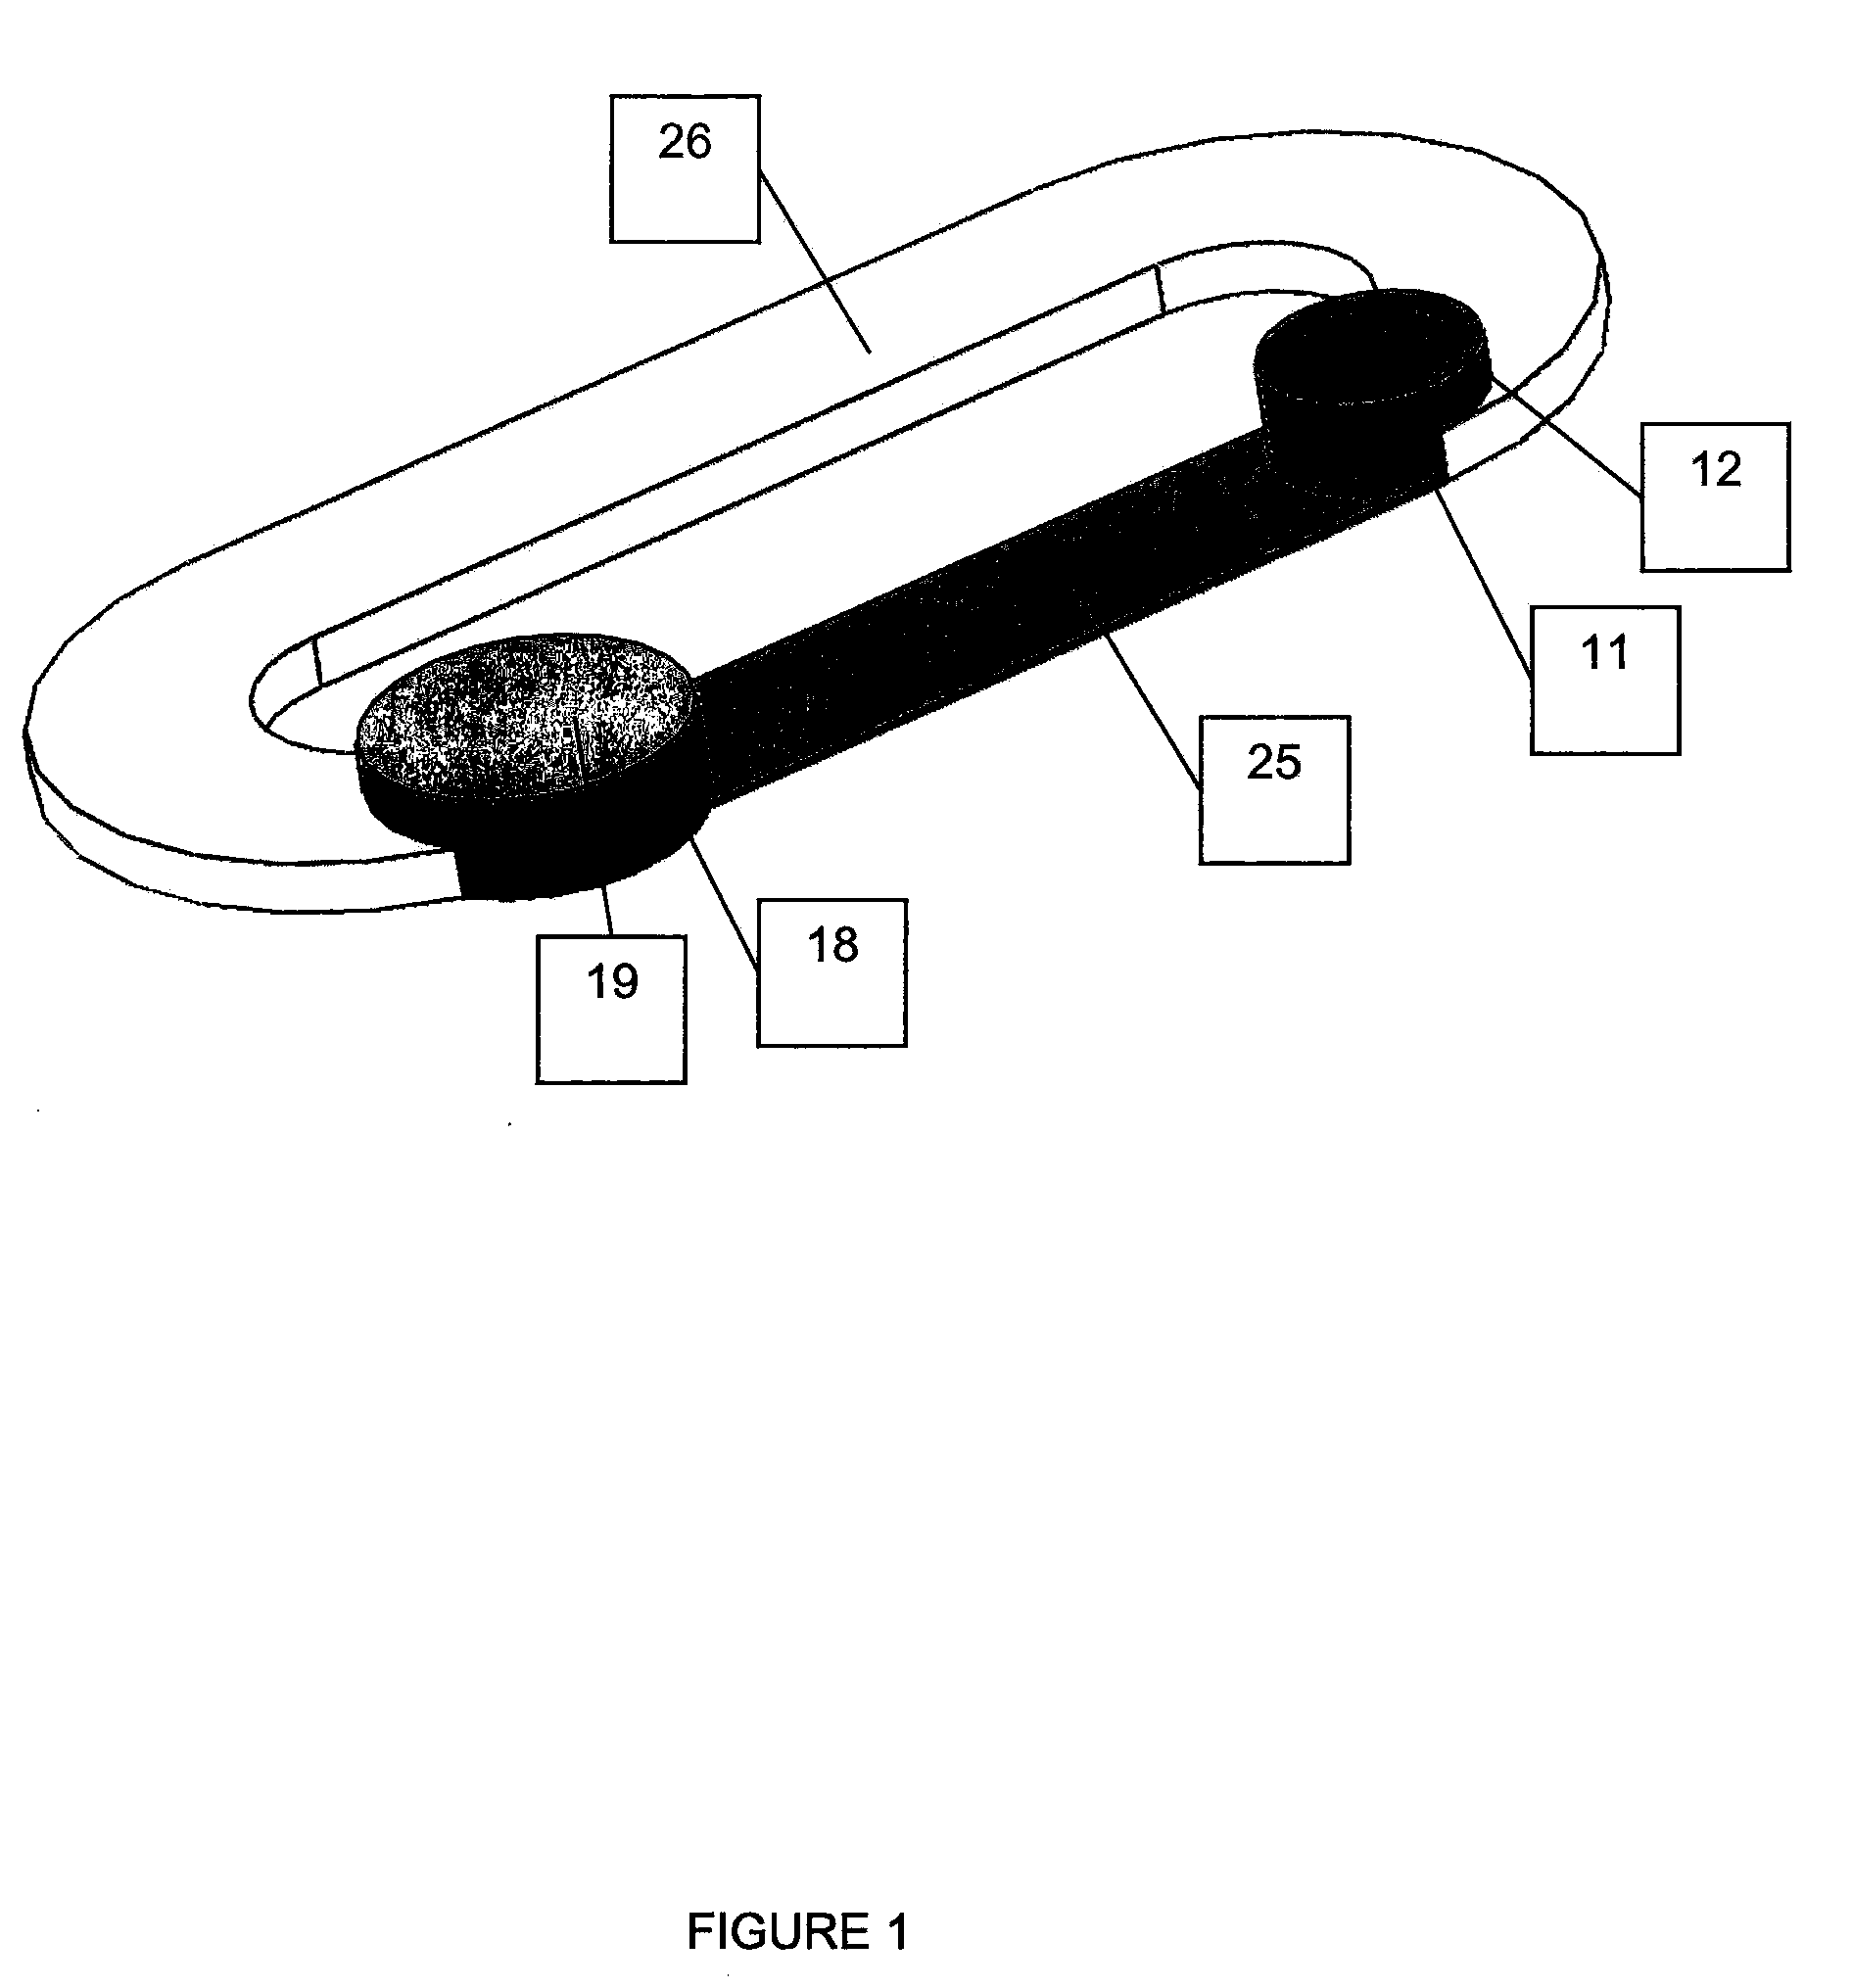 Microfluidic device having stable static gradient for analyzing chemotaxis